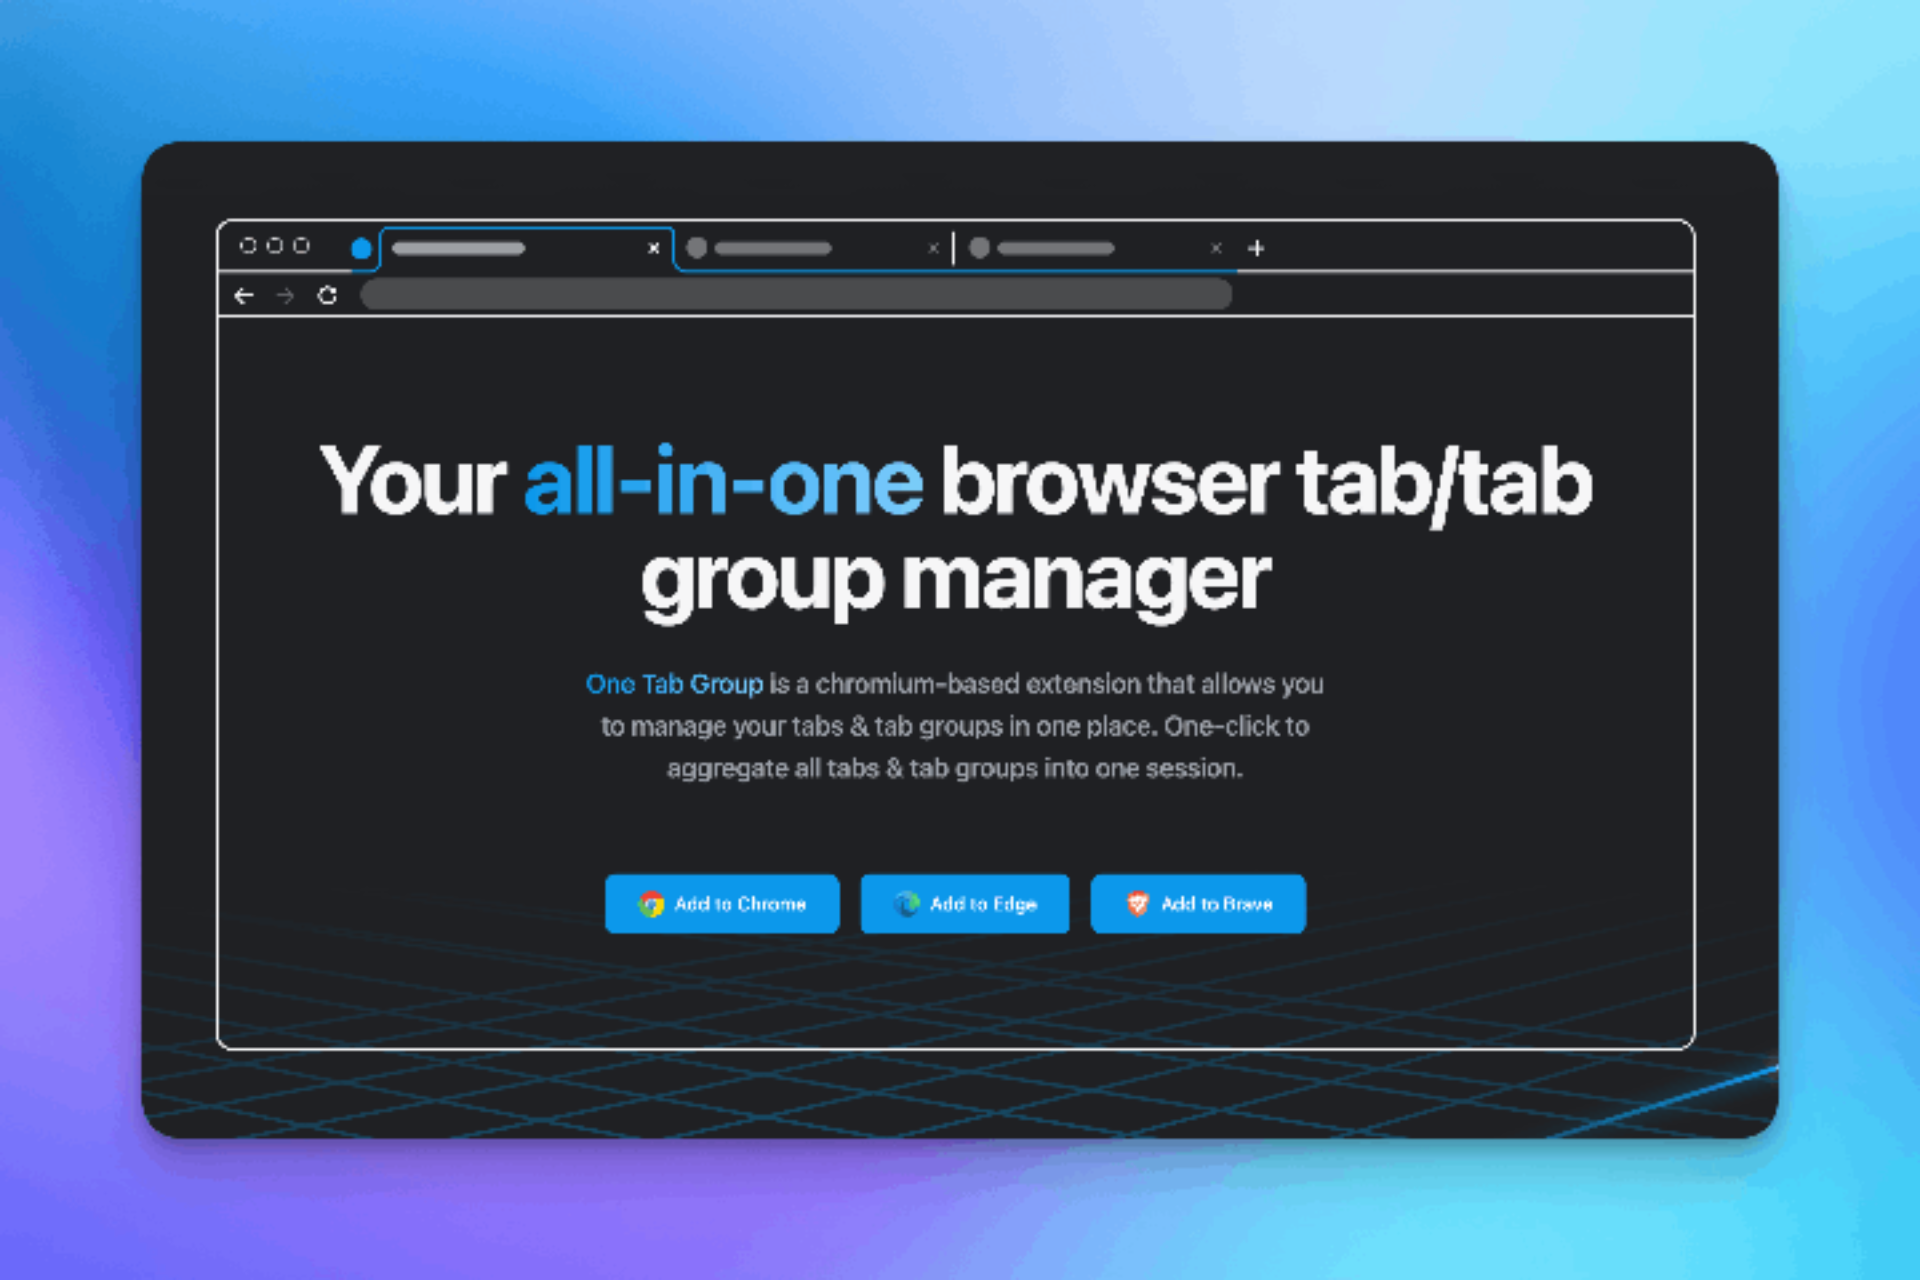 Lifetime Deal to One Tab Group: Lifetime for $49